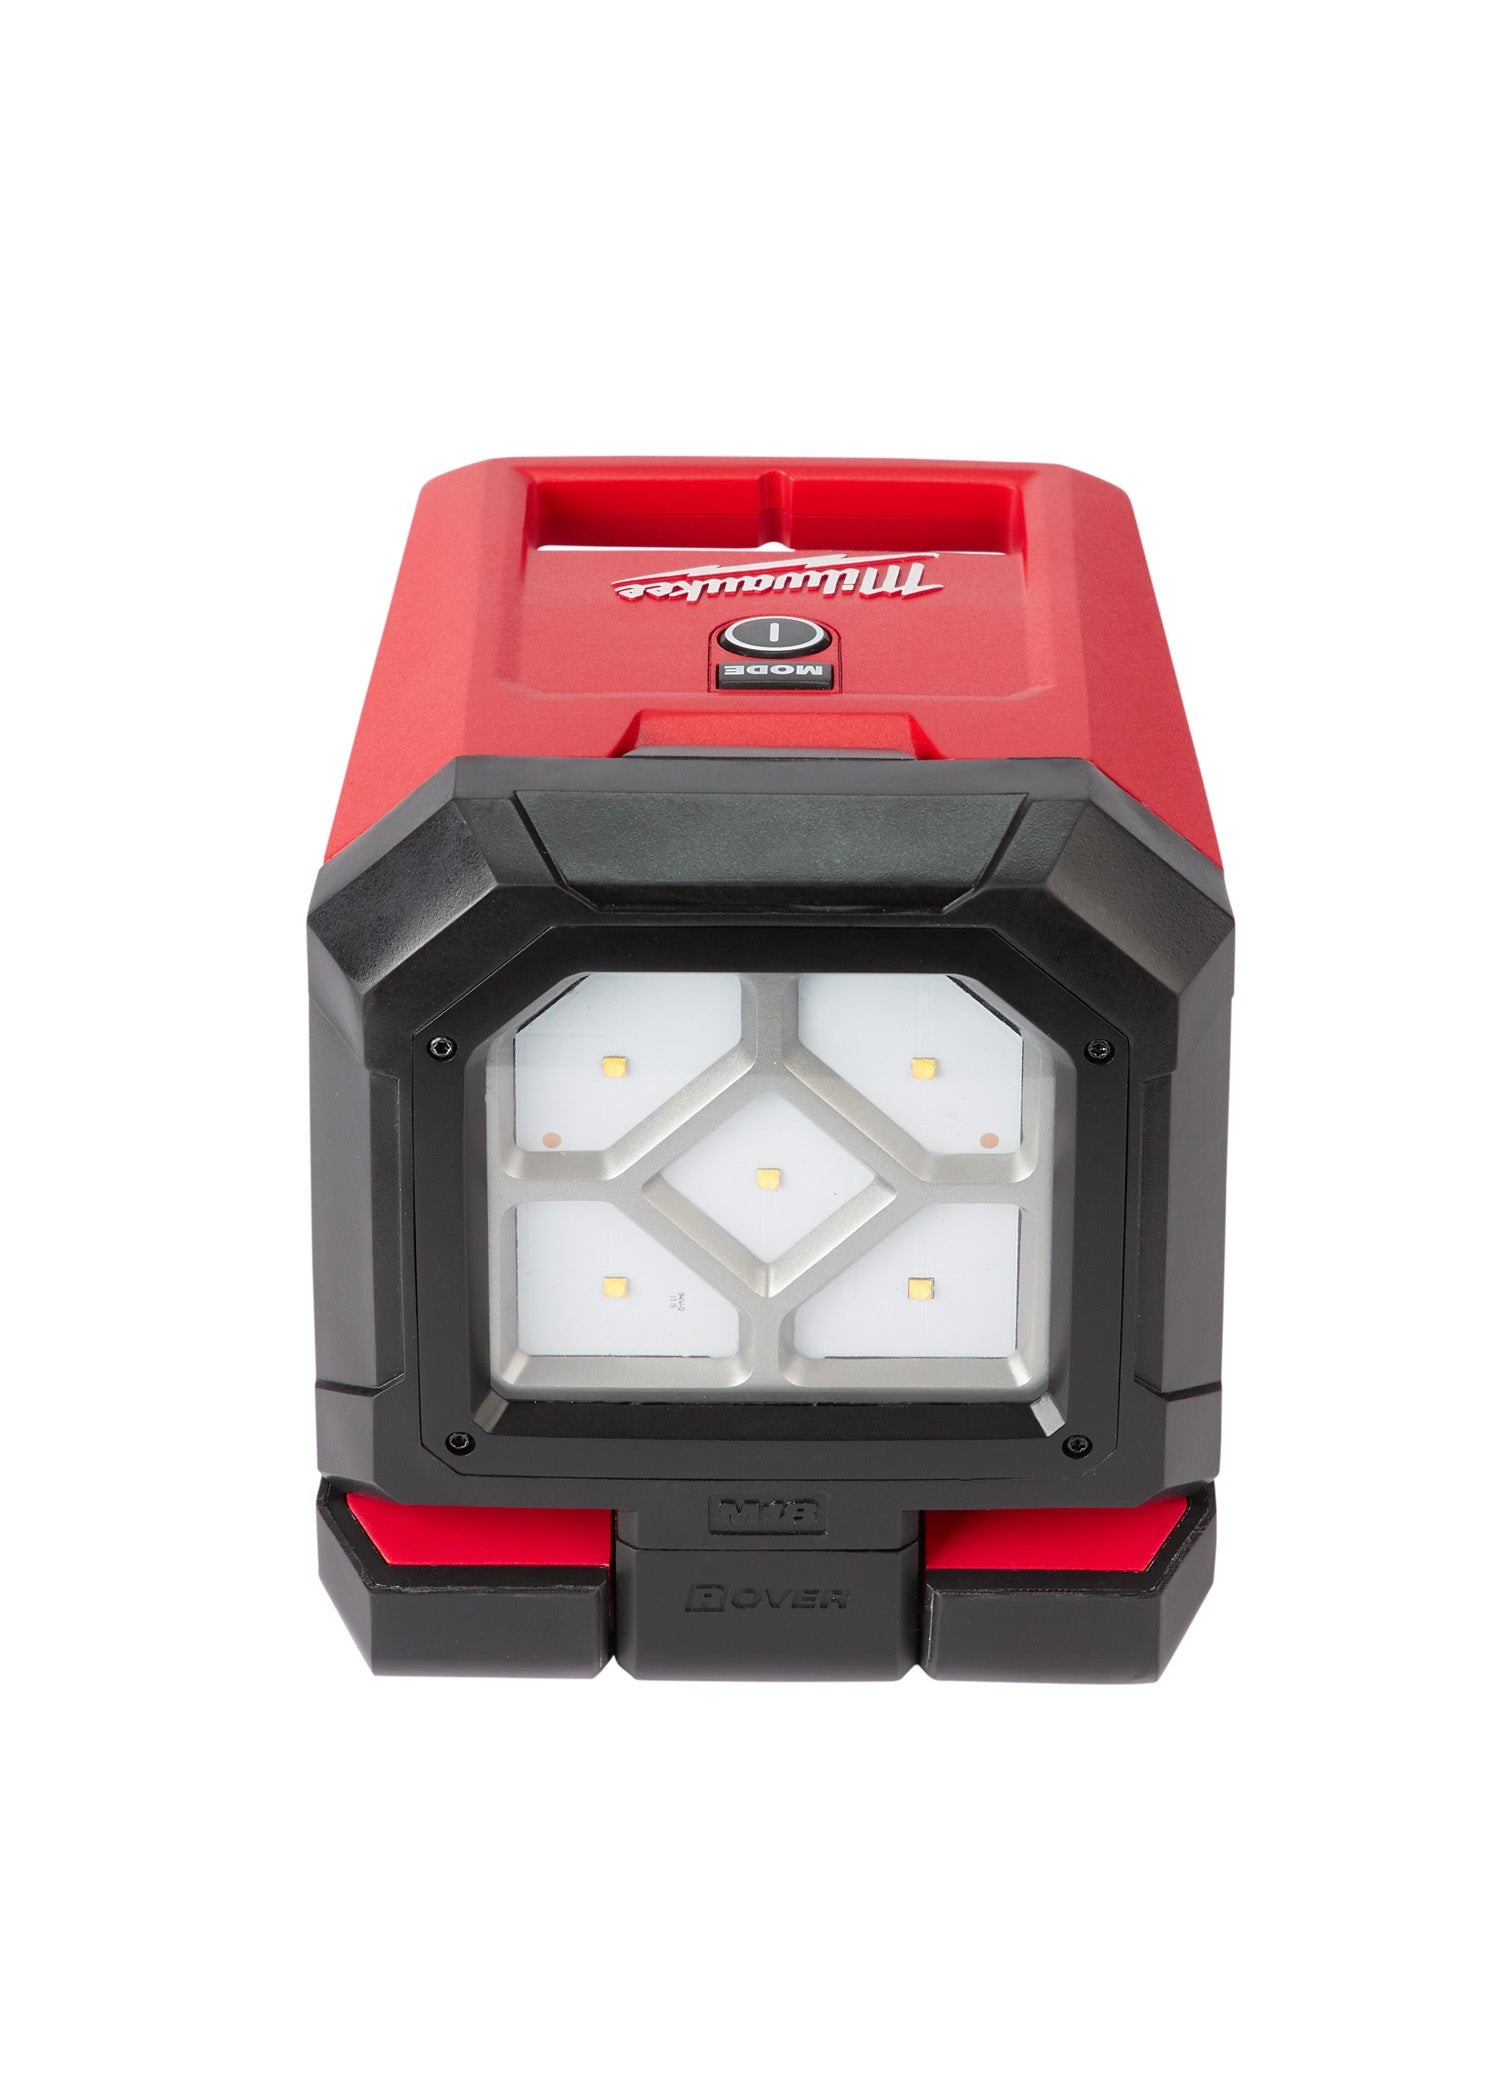 M18 ROVER Mounting Flood Light - Tool ONLY